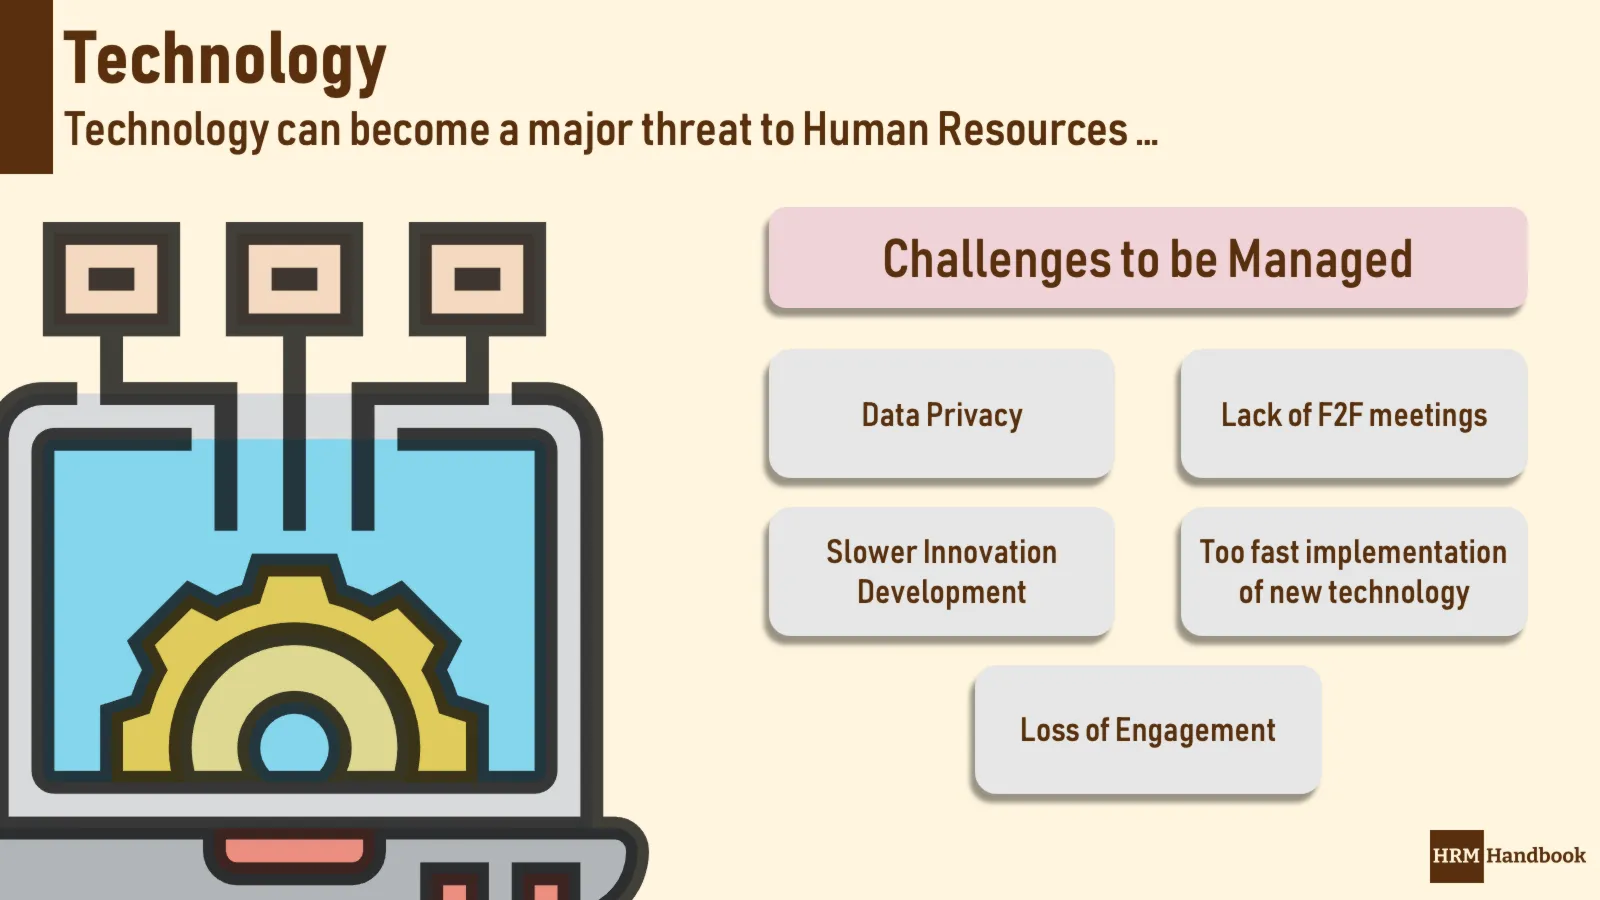 Technology can become a major challenge for Human Resources